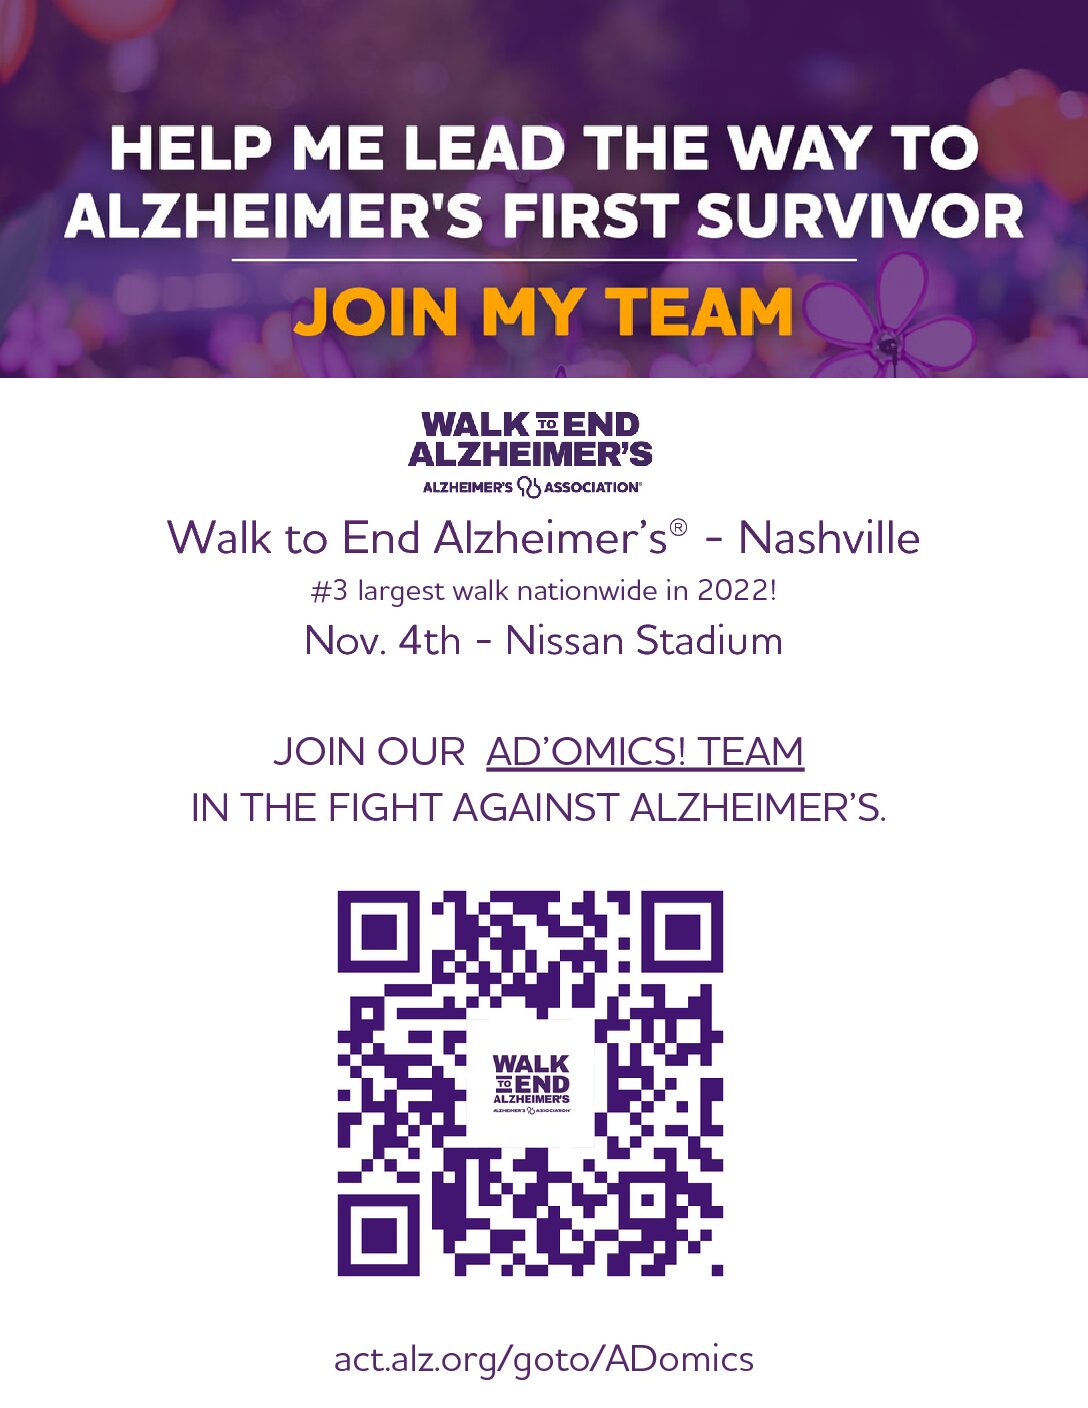 Join the RASR Lab team on the Walk to End Alzheimer's